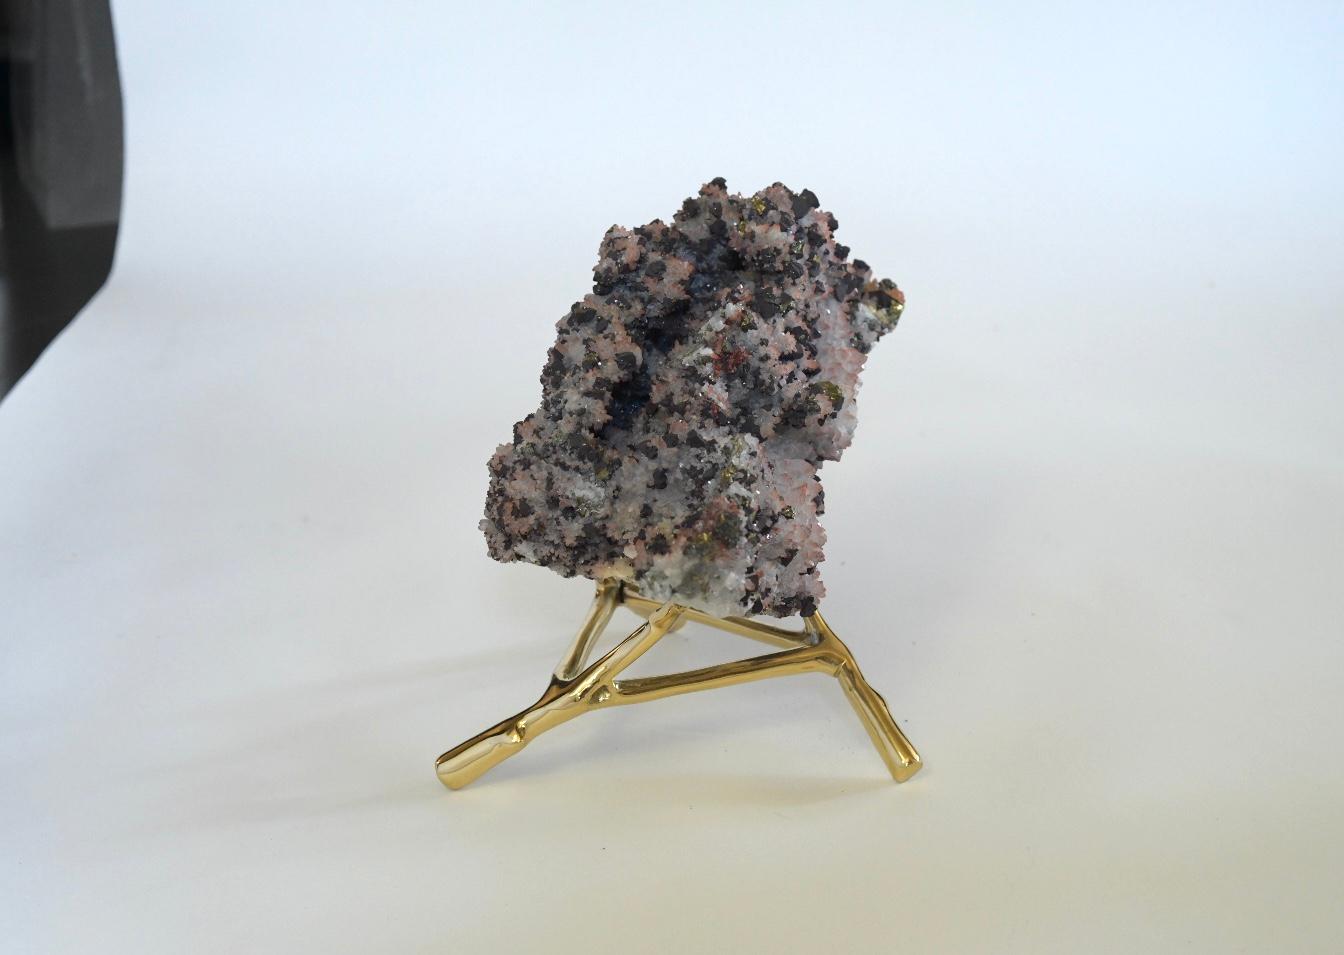 Salt-like, pinkish brown natural sculpture with copper on the surface. Polish brass stand. Measures: 11.5” /L x 7.5” /W x 5” /H.